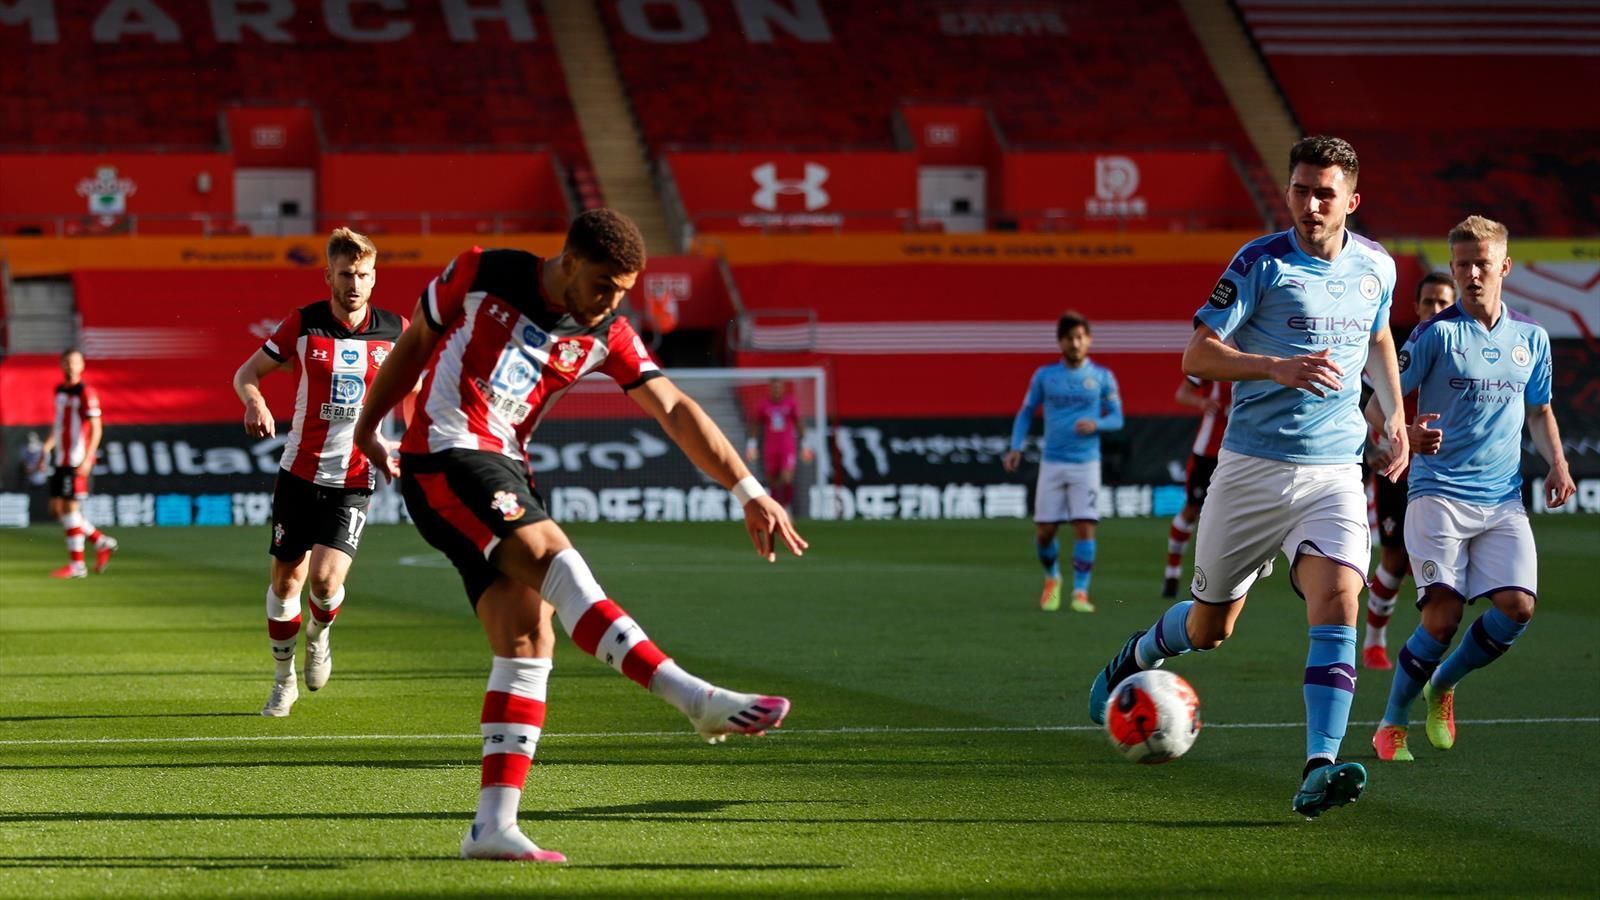 Southampton Wins against Manchester City Thanks to Che Adams and Alex McCarthy